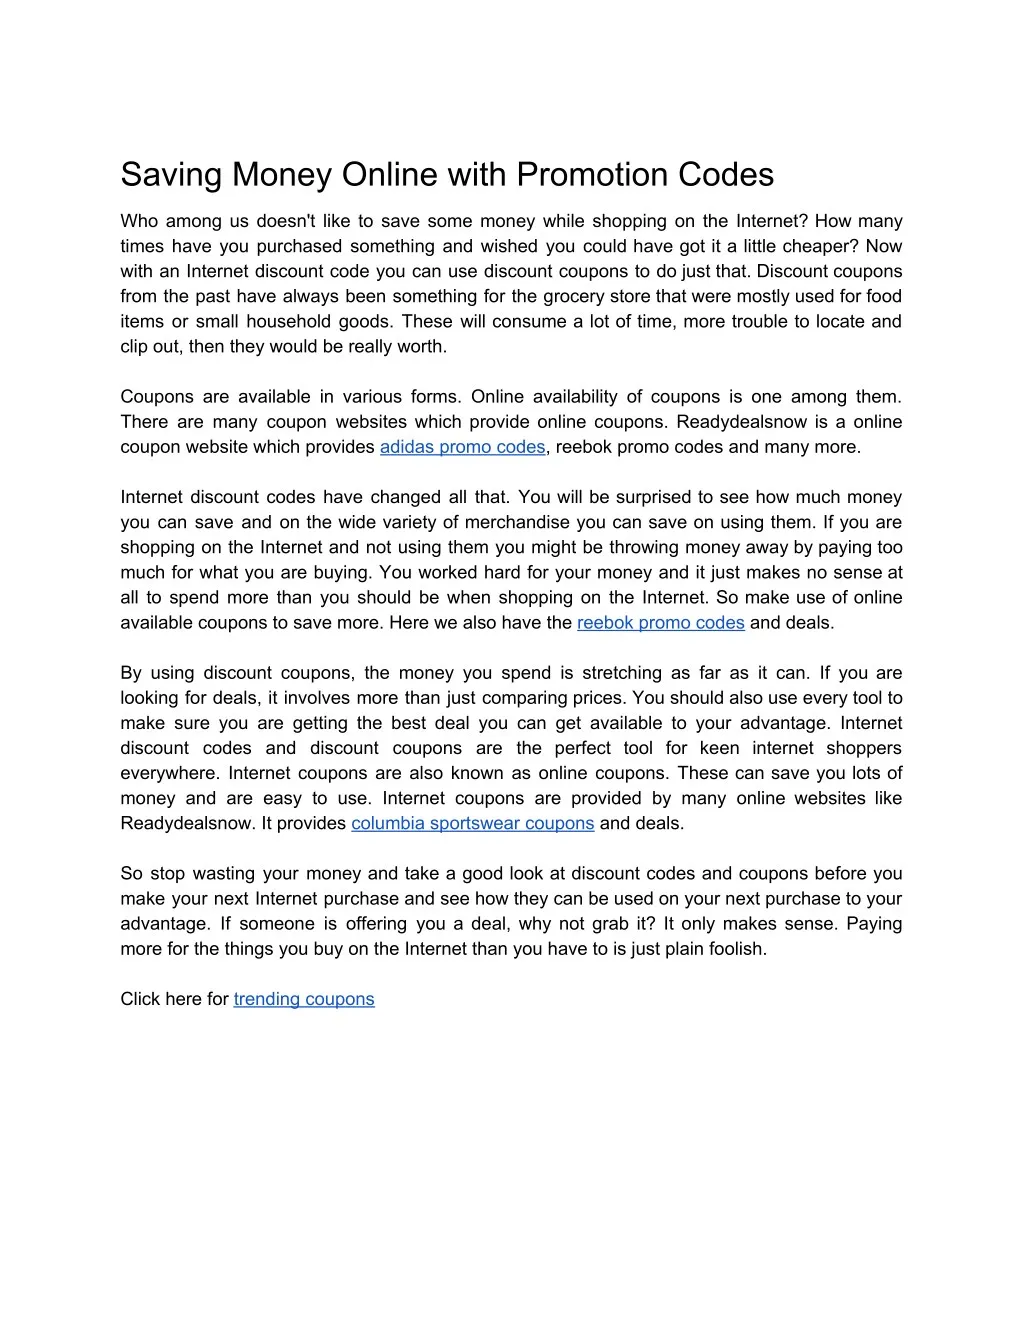 saving money online with promotion codes